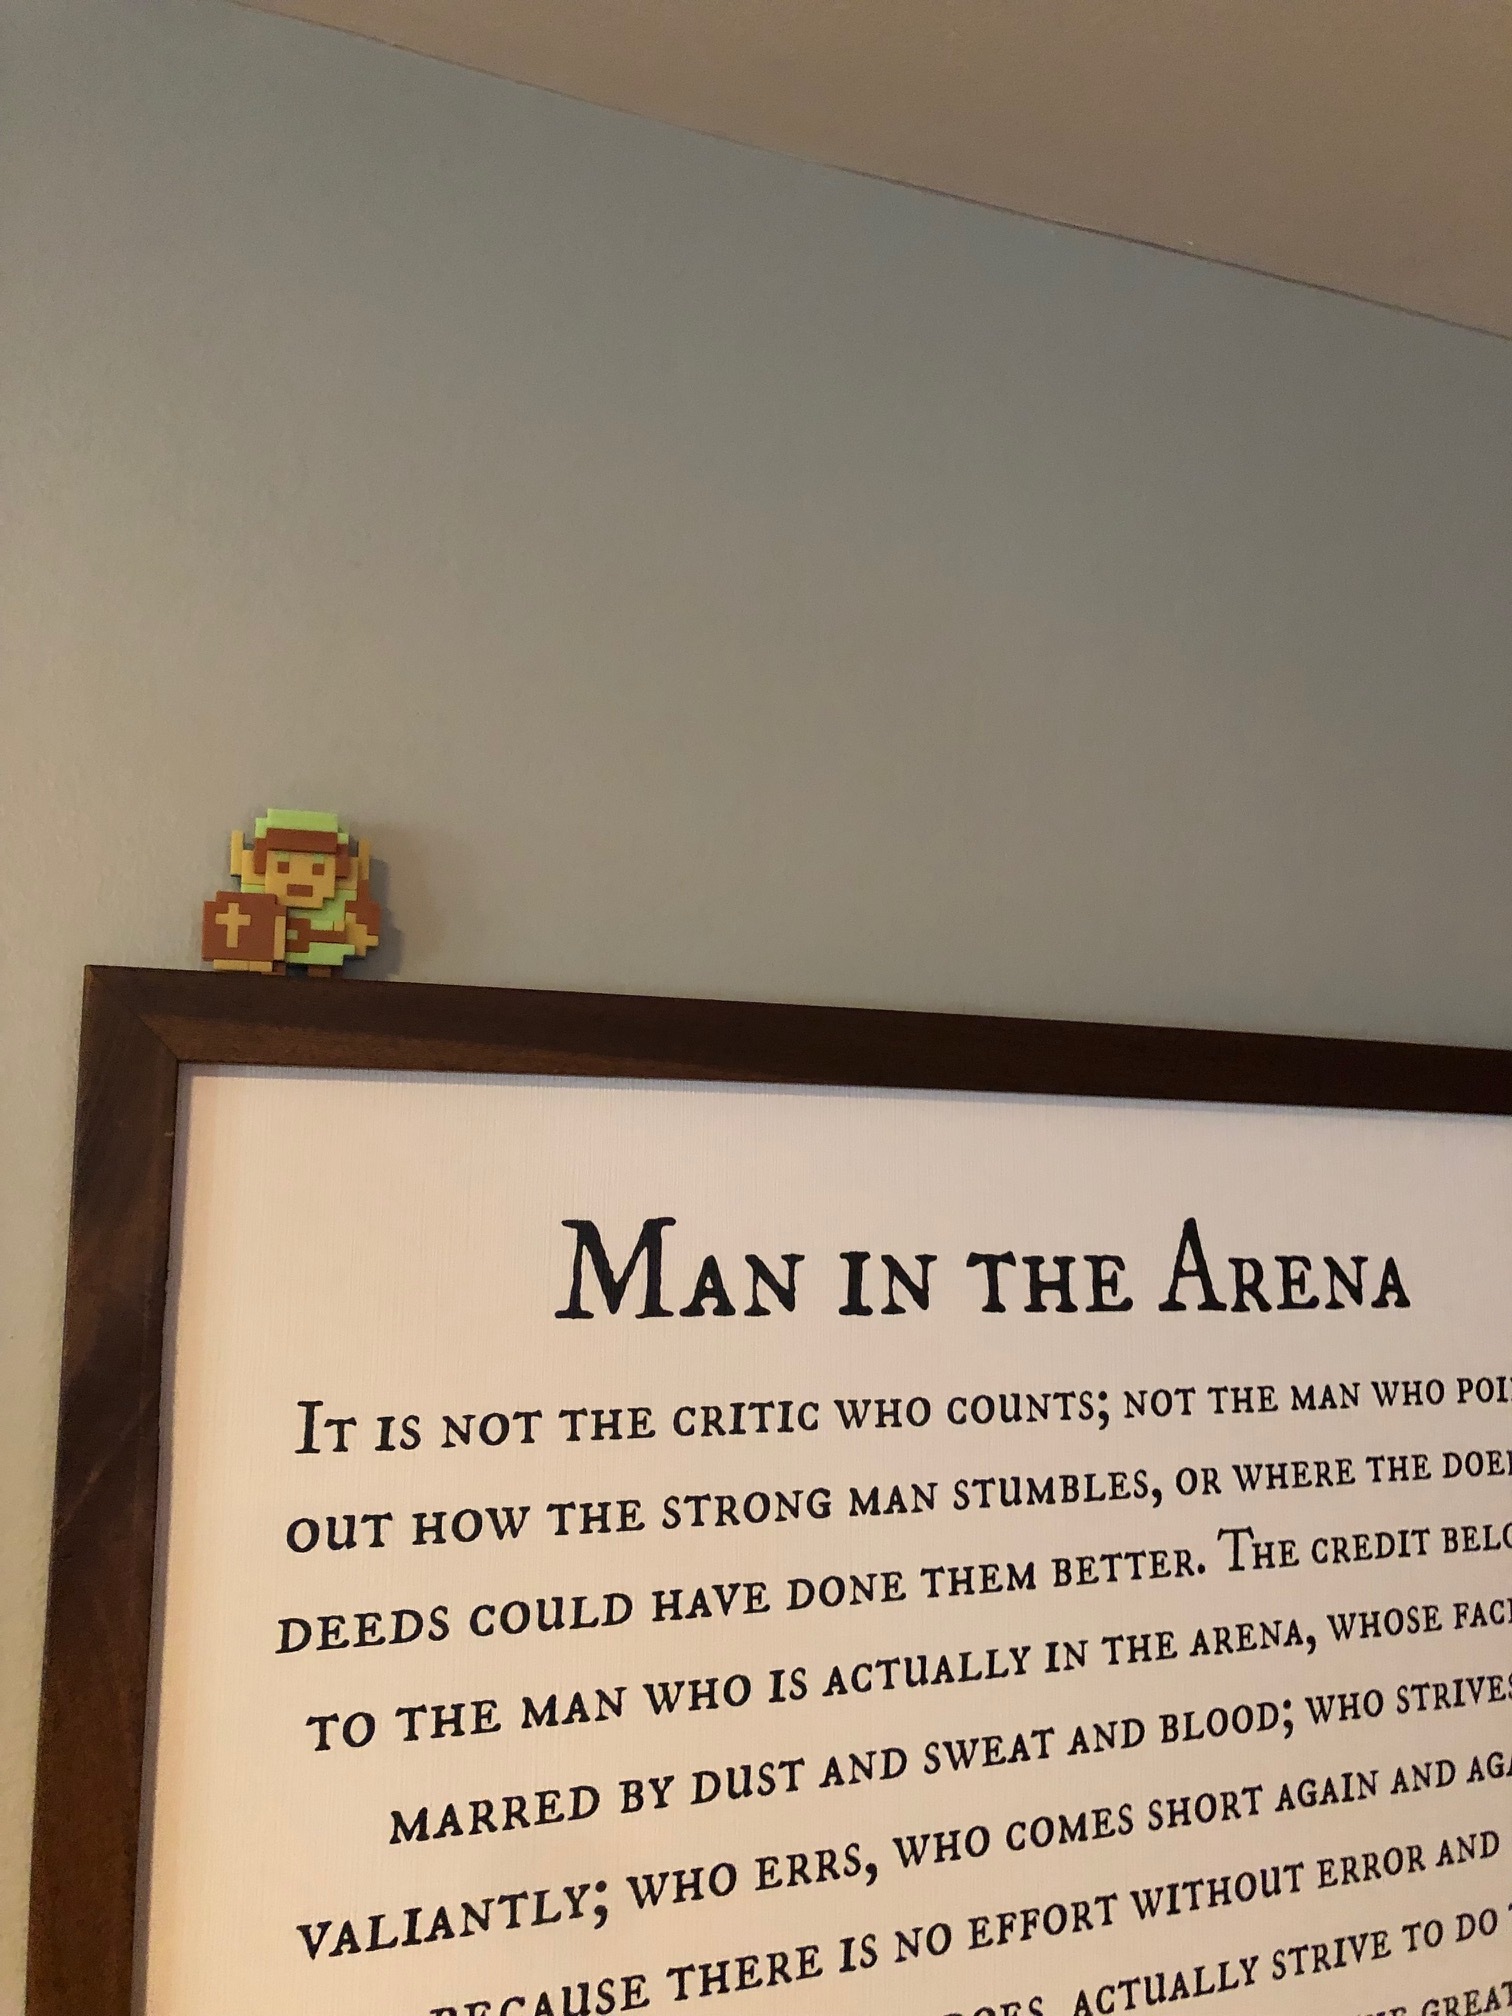 Link is the Man in the Arena